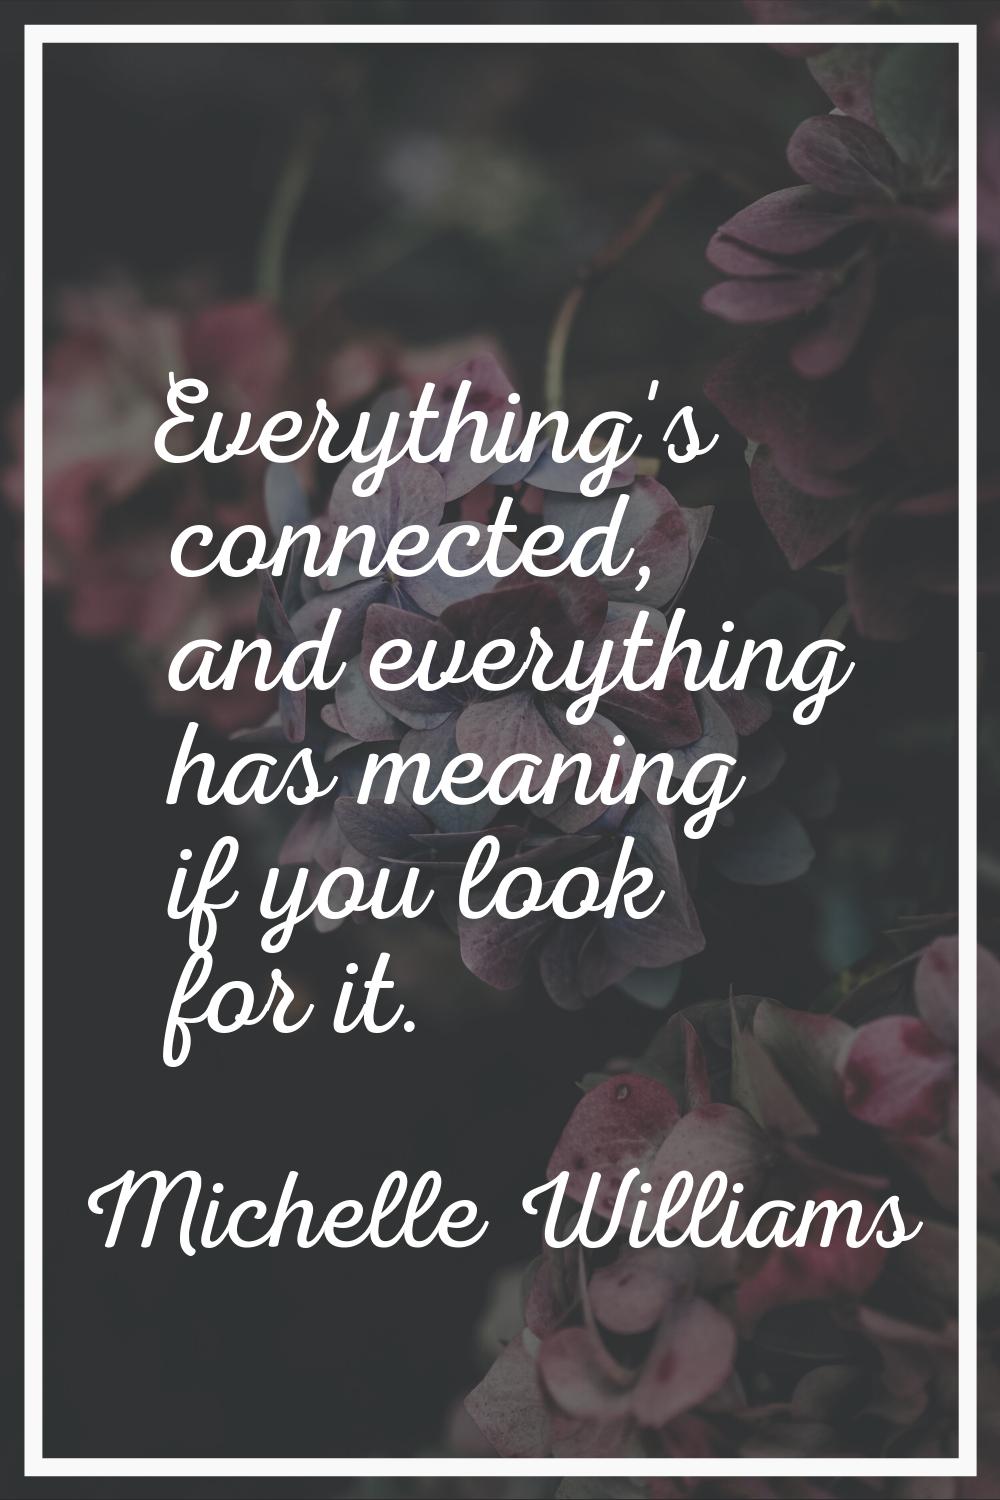 Everything's connected, and everything has meaning if you look for it.